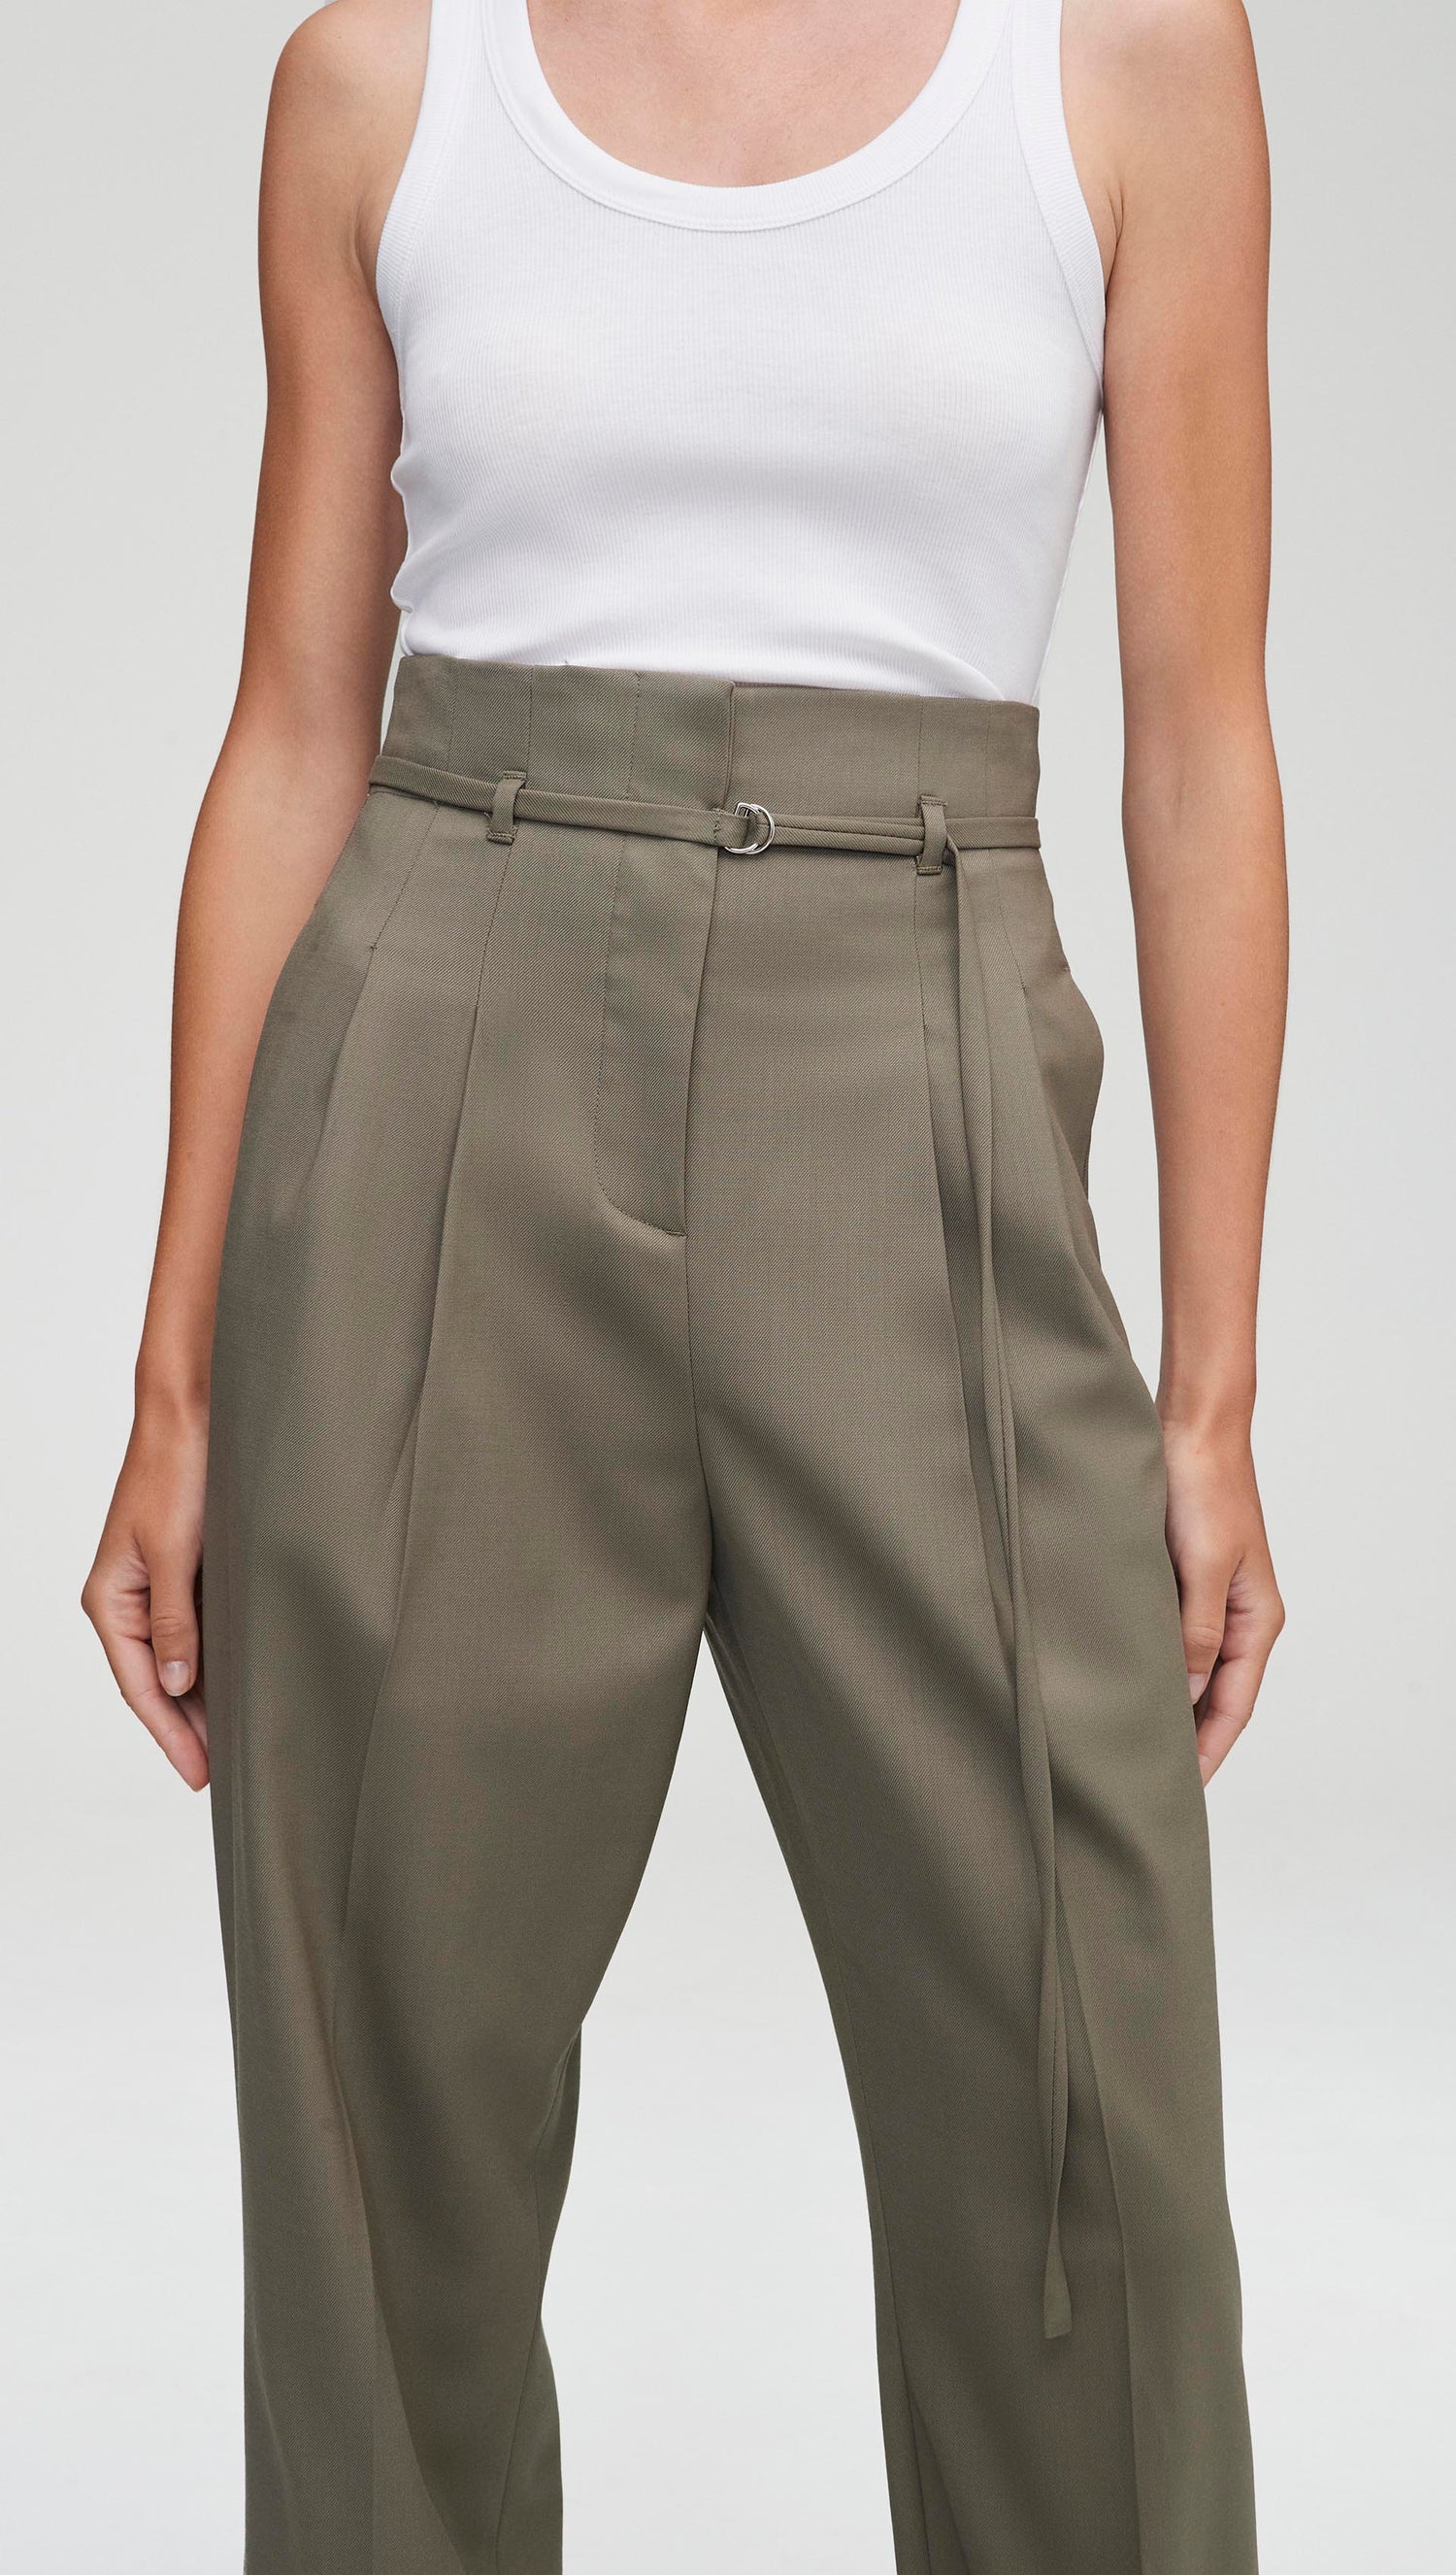 Express | Super High Waisted Belted Linen-Blend Paperbag Ankle Pant in Swan  | Express Style Trial